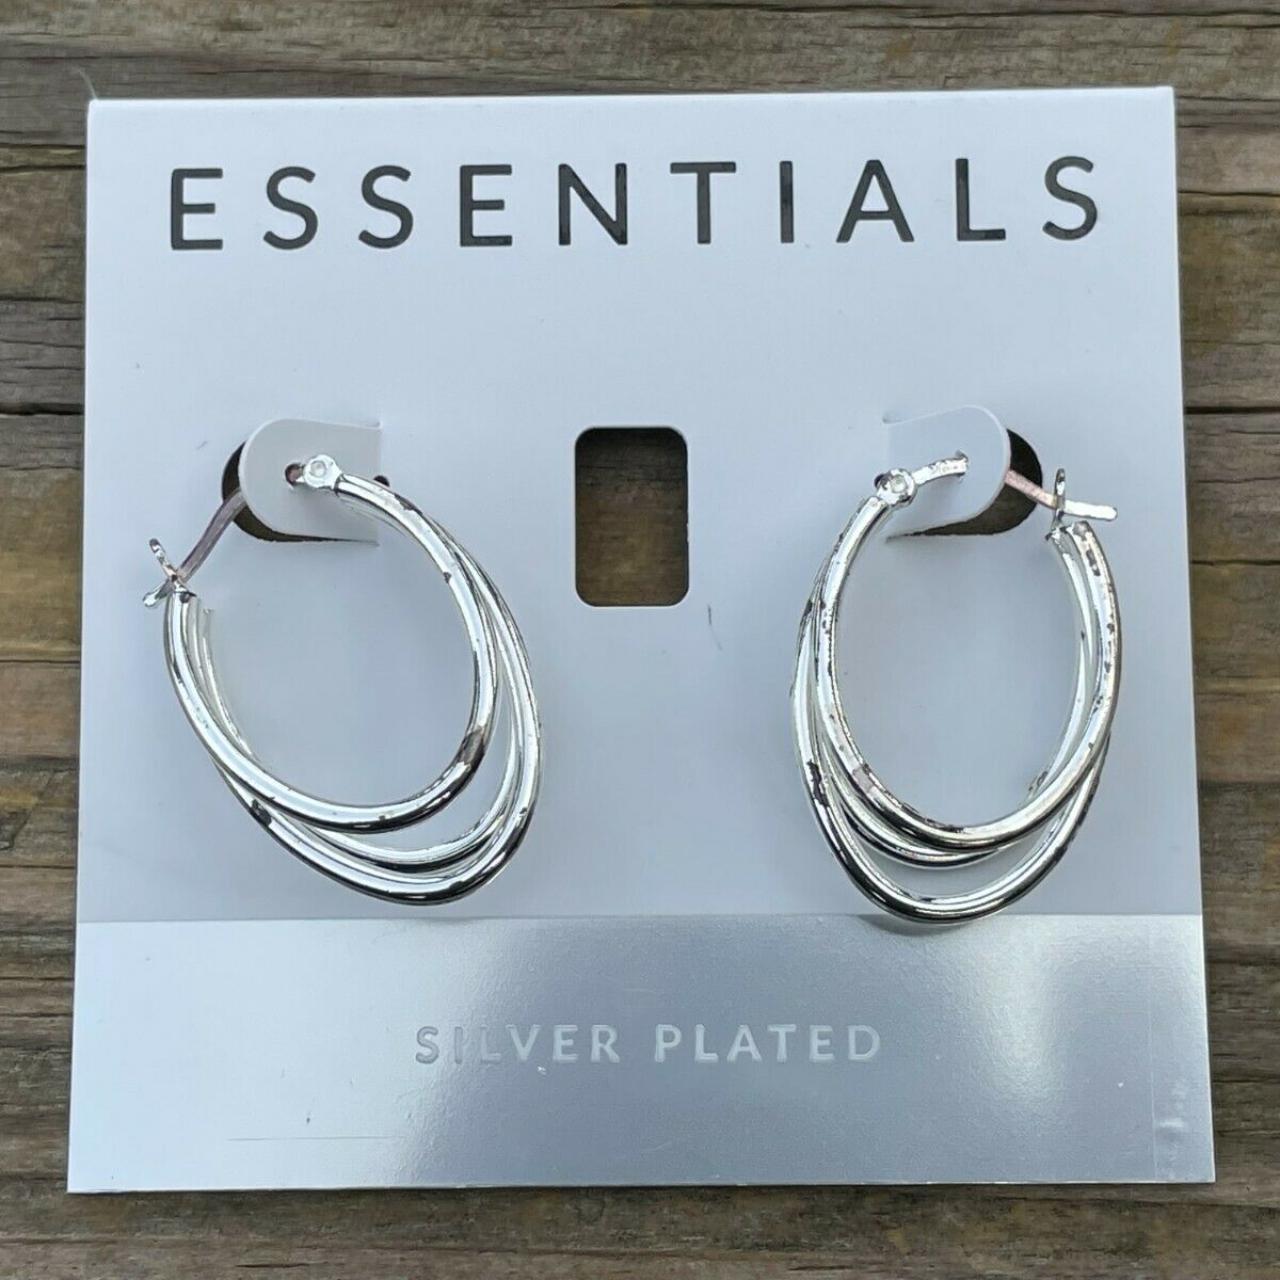 Product Image 2 - Essentials Earrings silver plated Triple